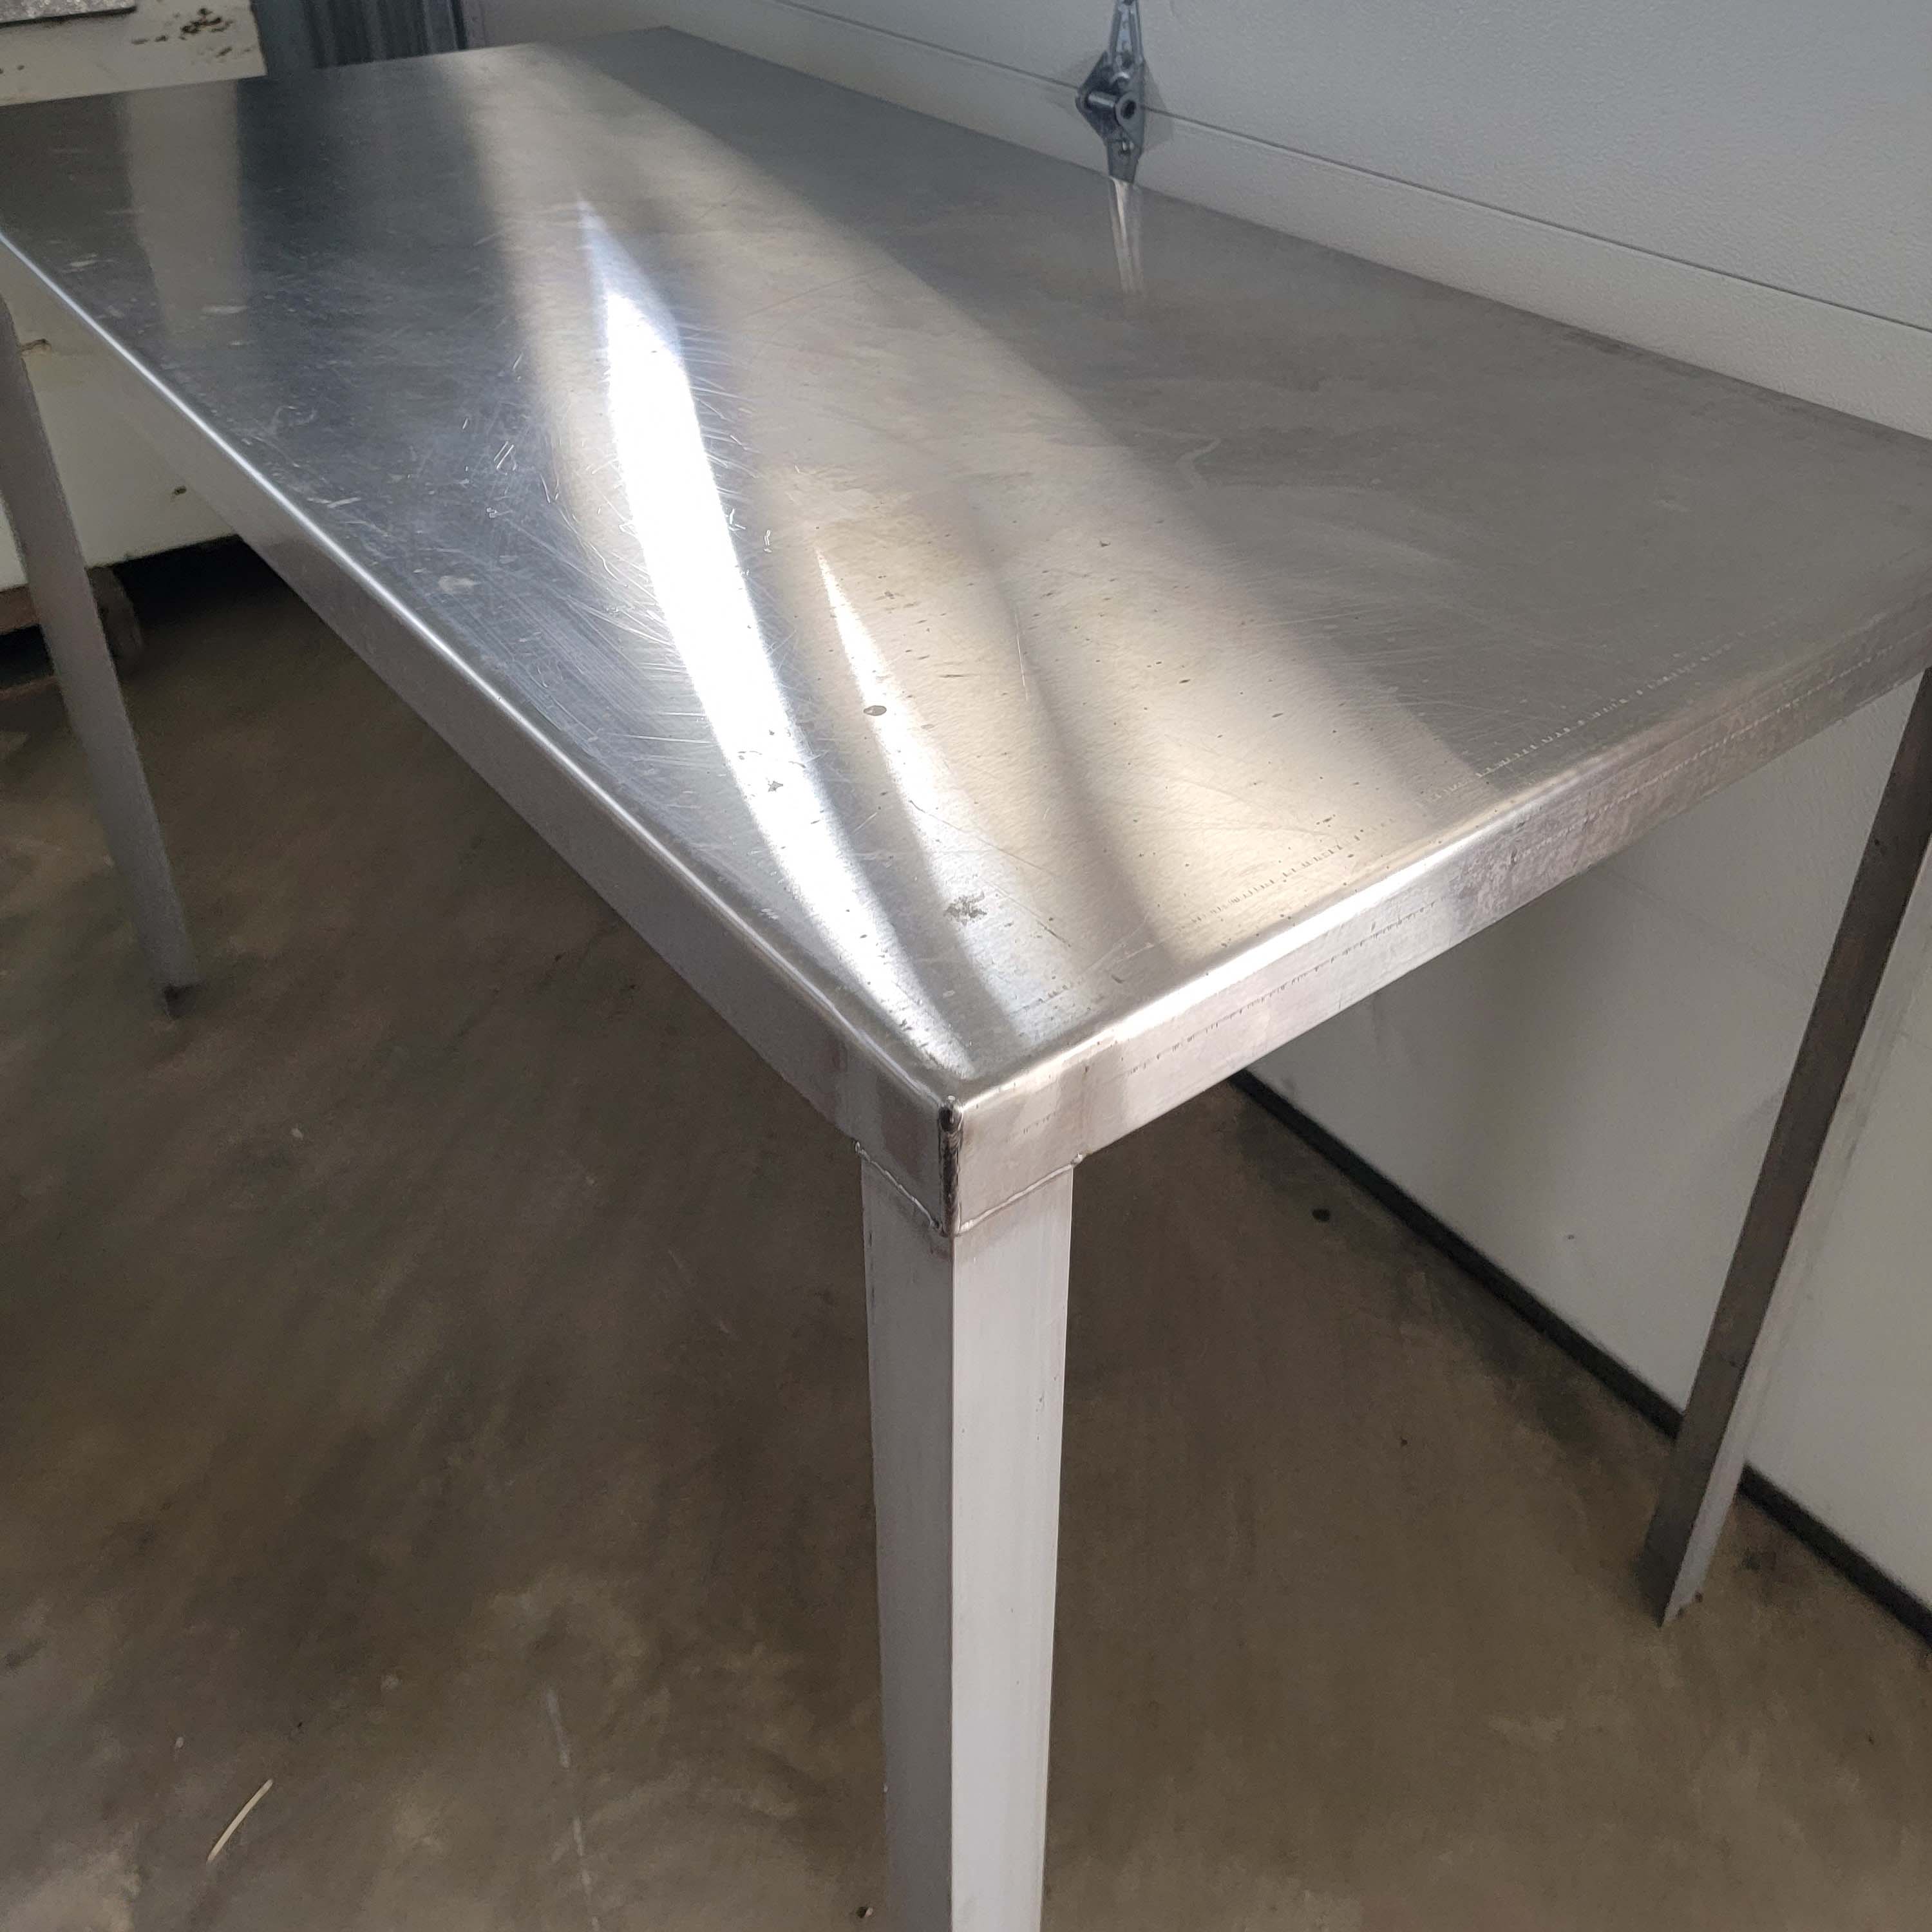 stainless steel table for food prep. 5' long.